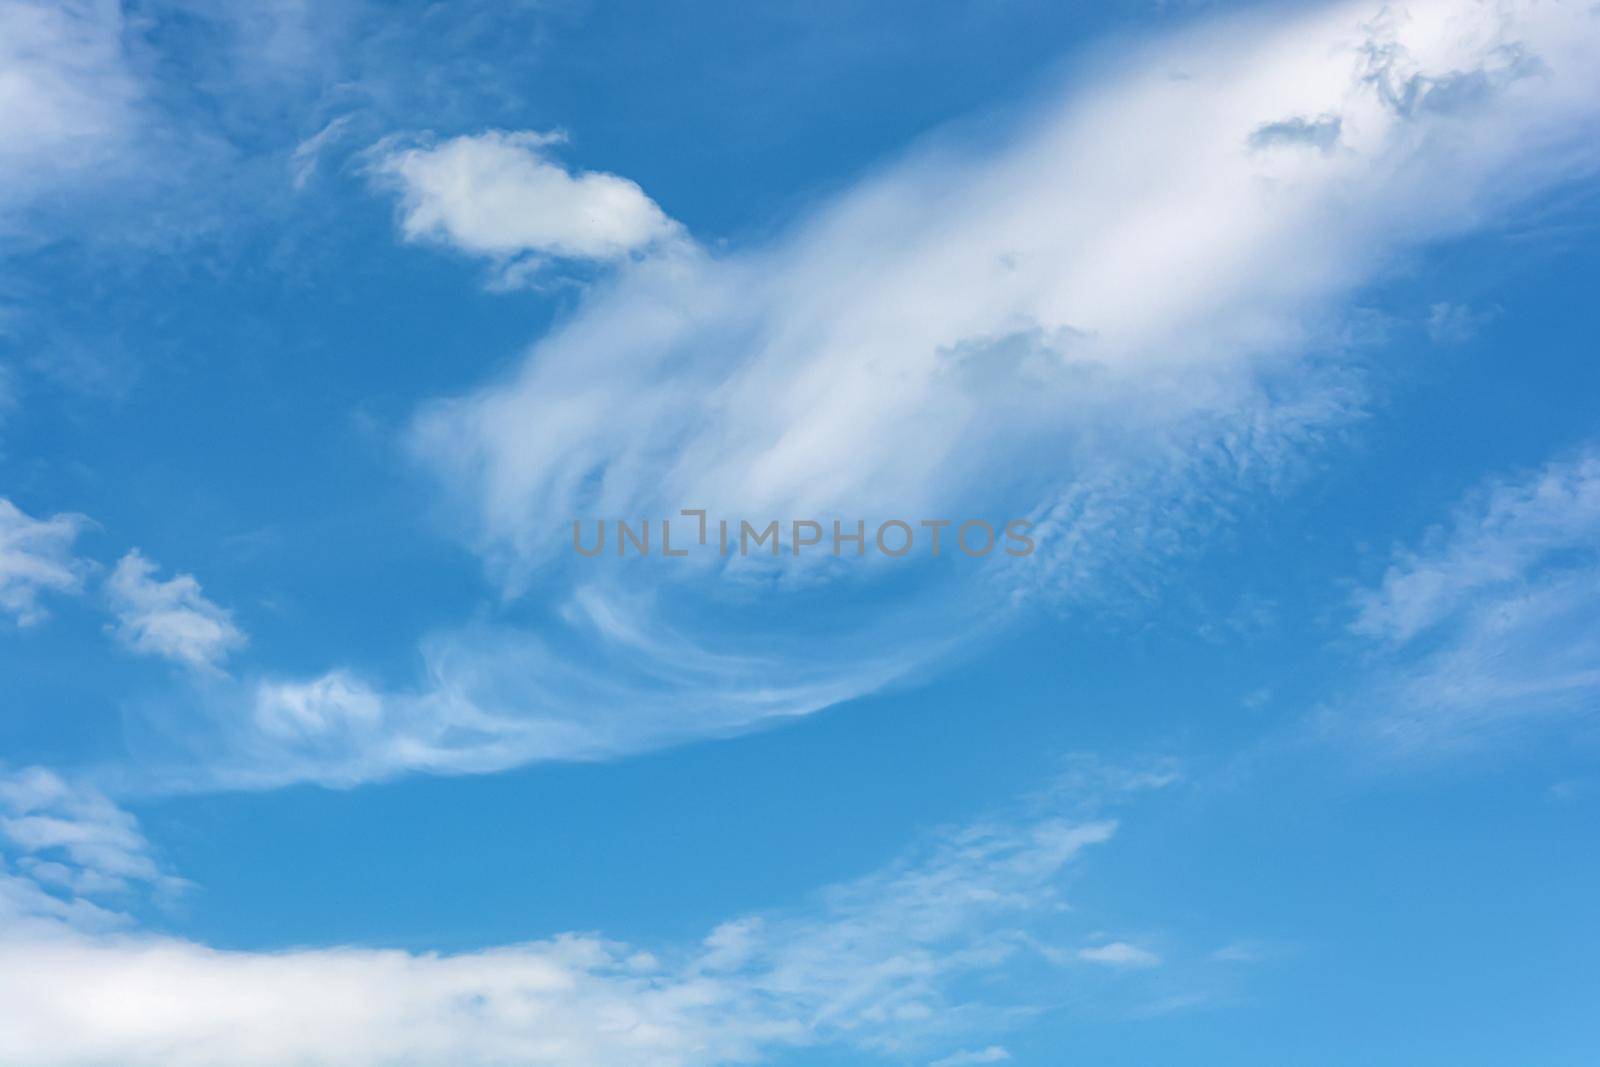 White cirrus clouds against the blue sky. Close-up, blurred, background by Grommik